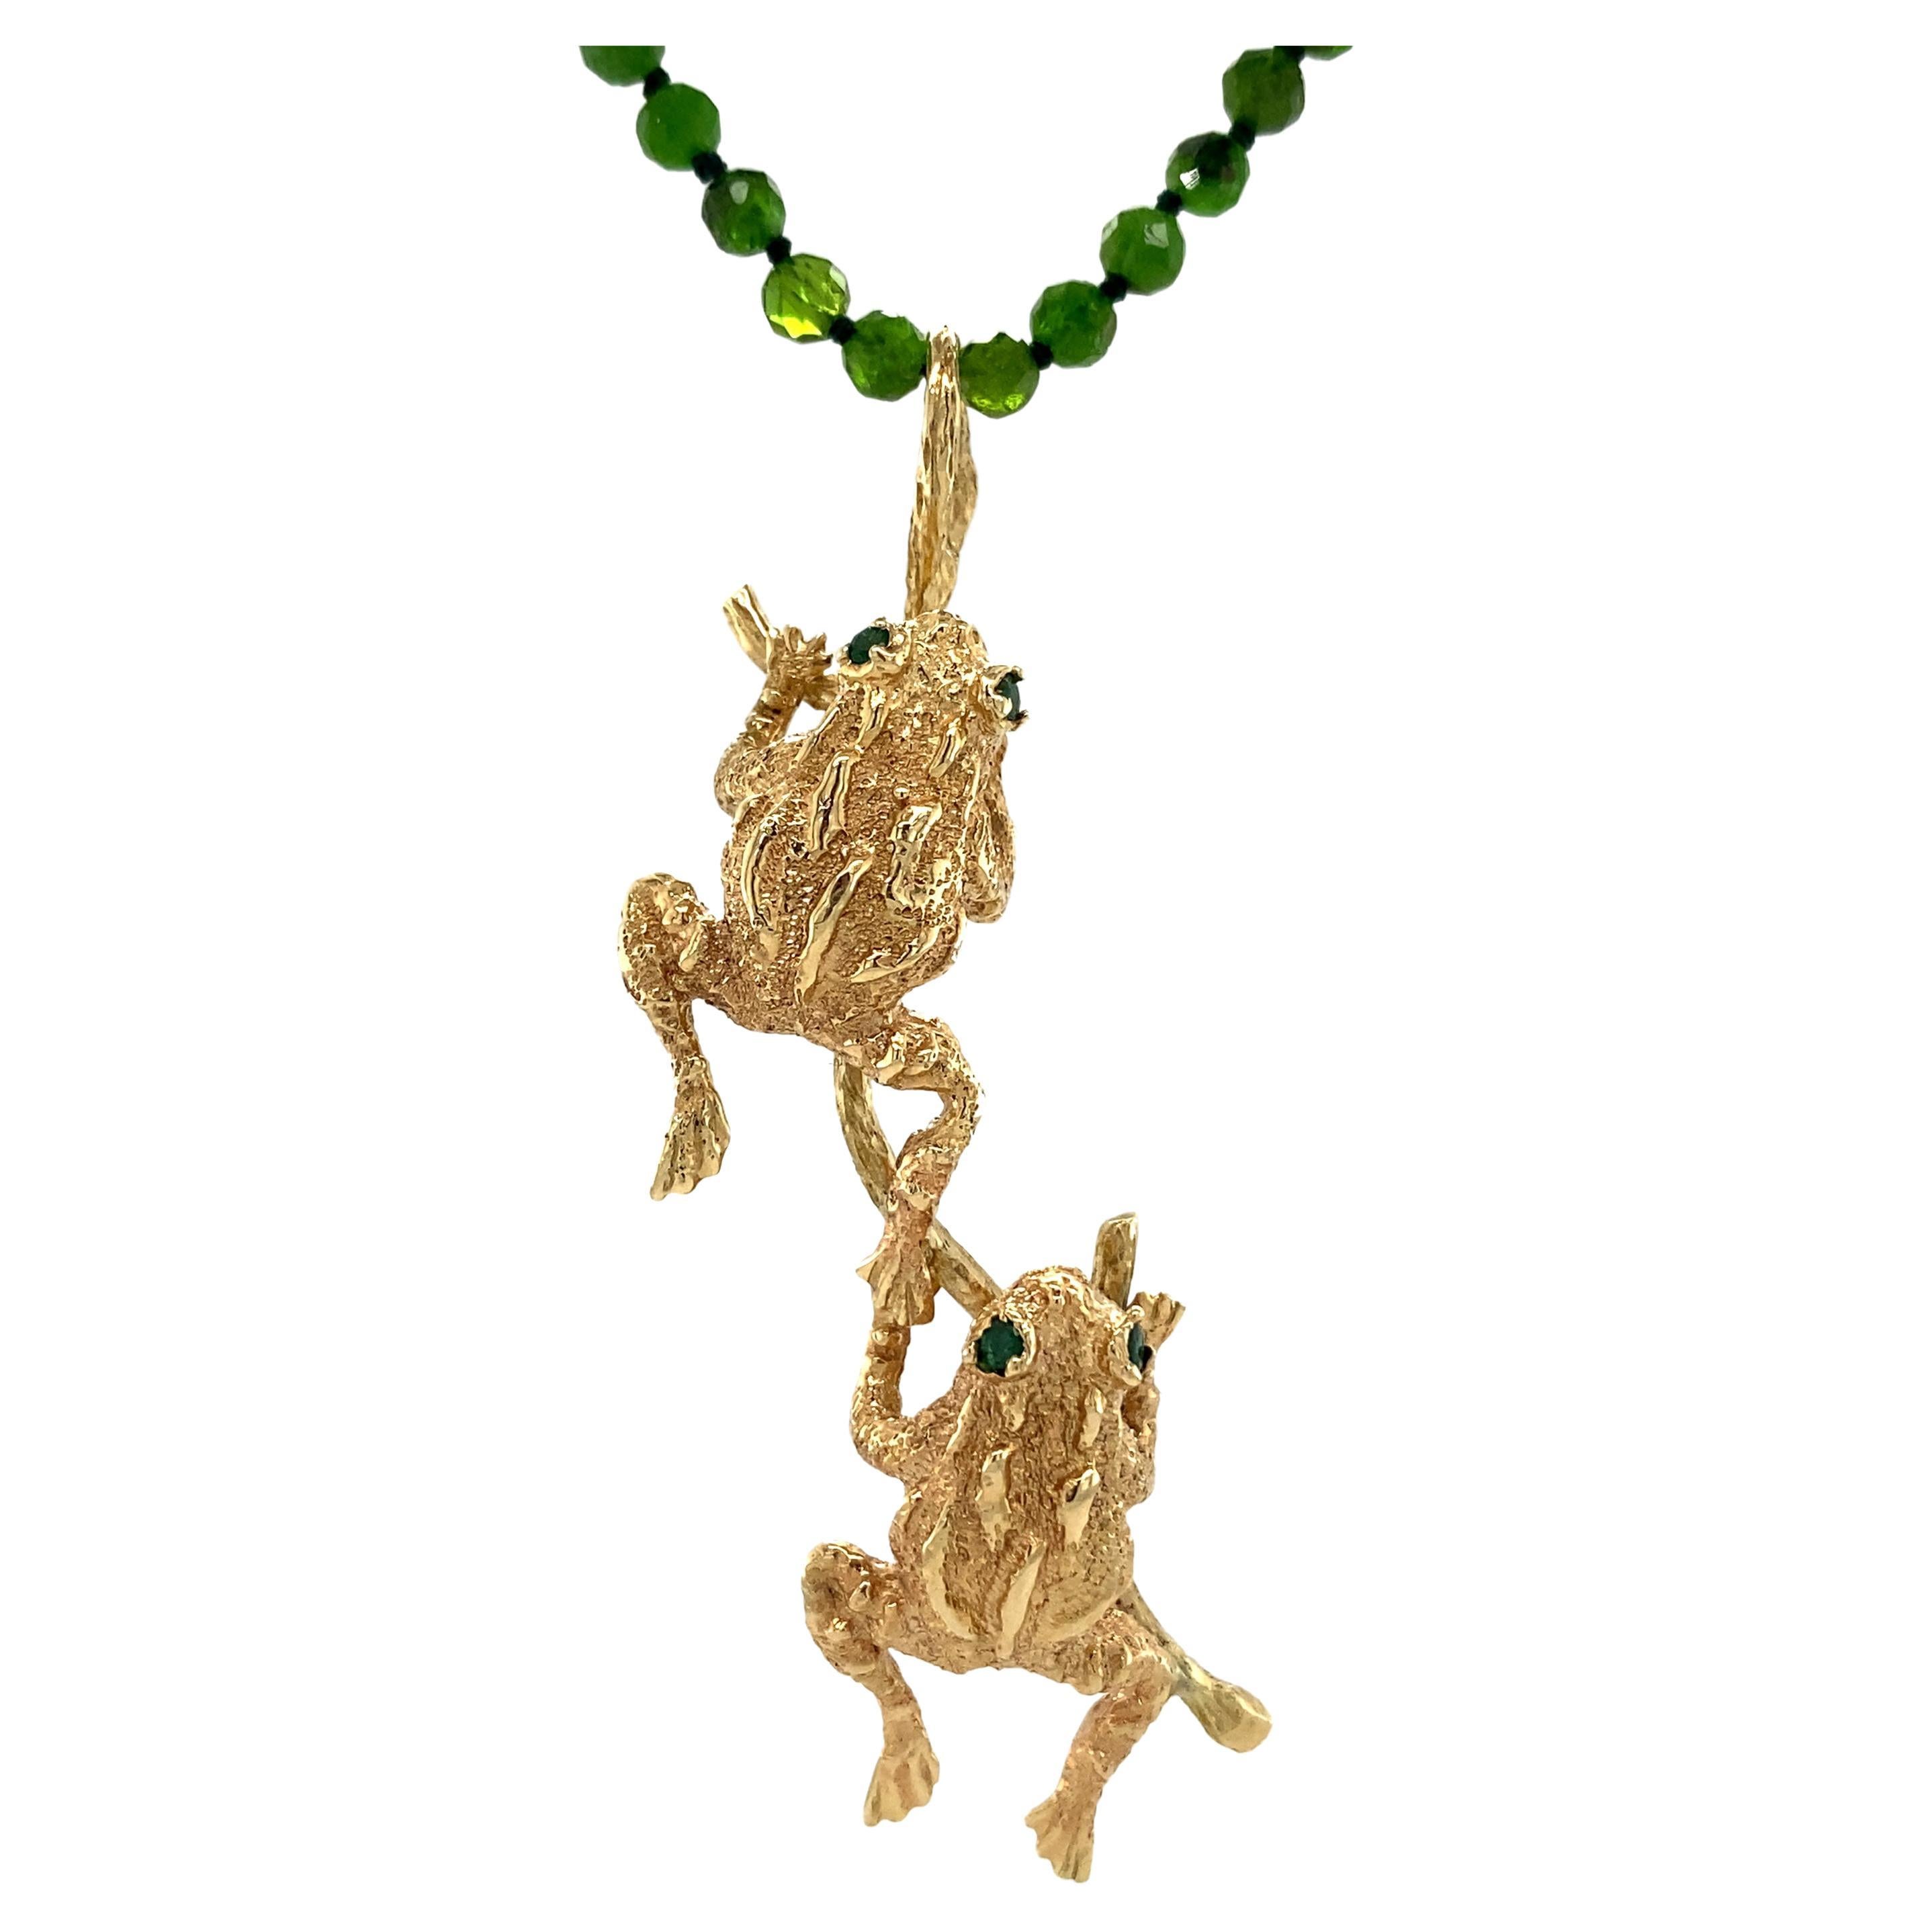 "Climbers" Frog Pendant in 14 Karat Gold on Chrome Diopside Beaded Chain